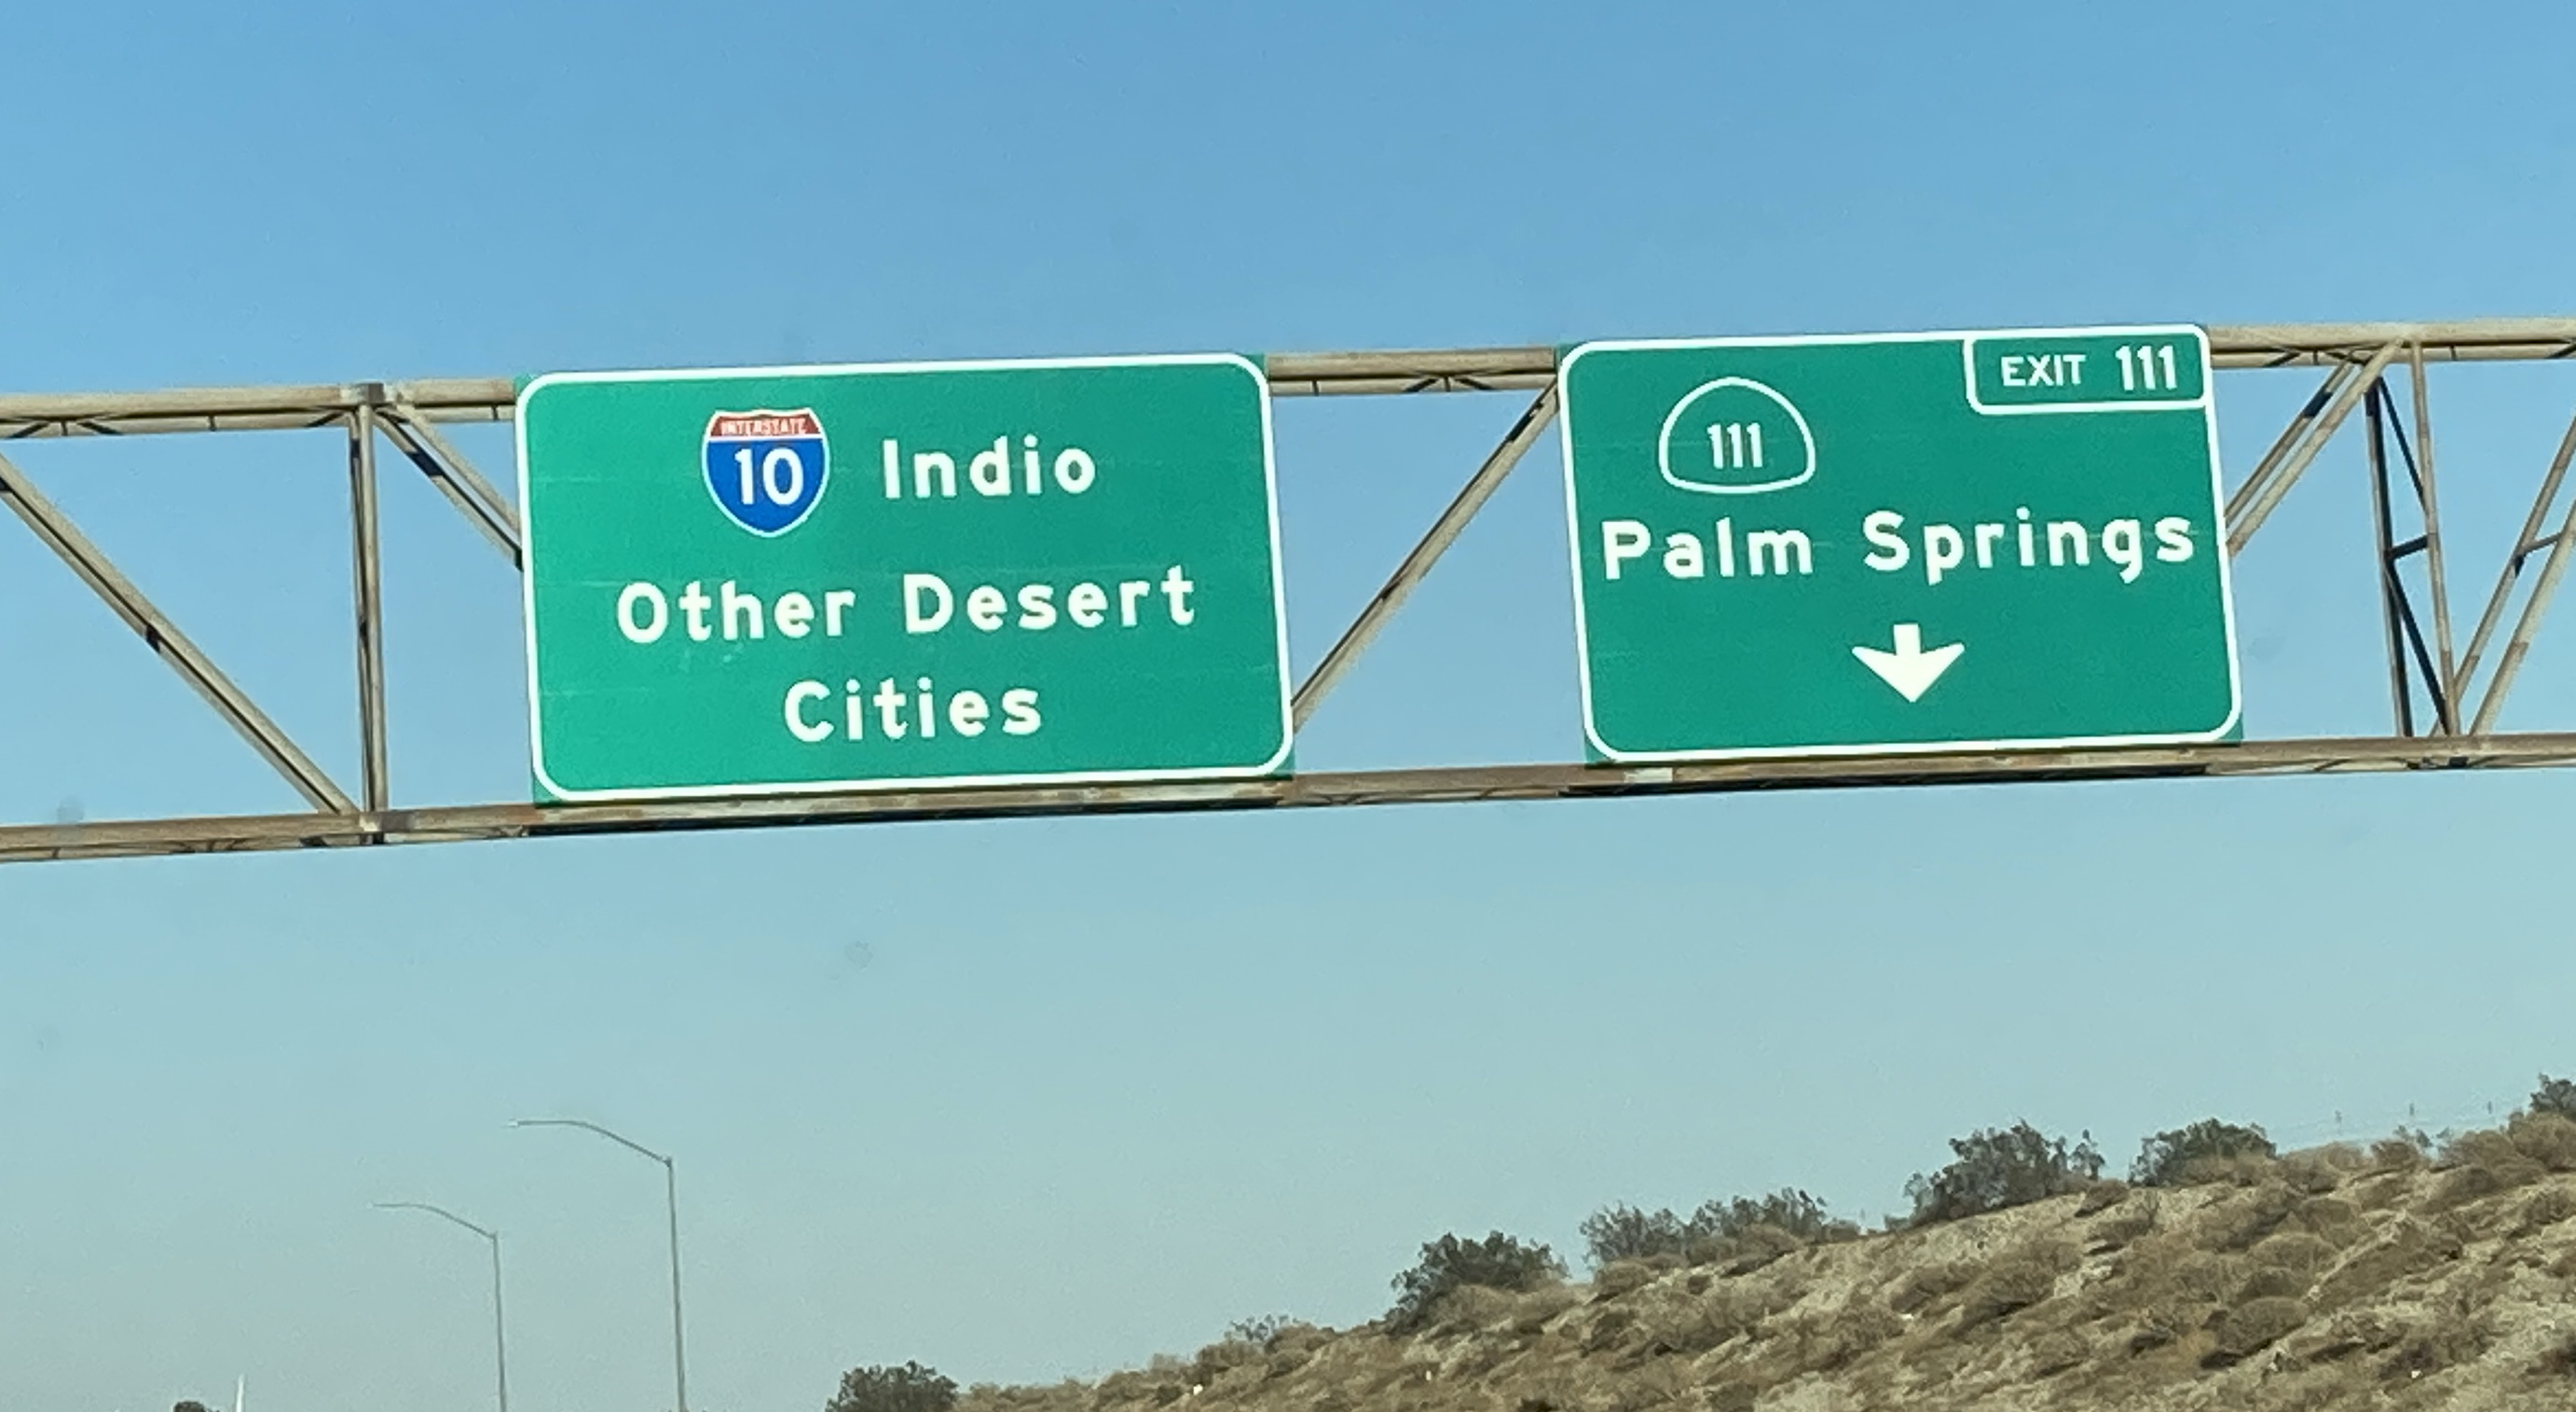 I10E/W of CA111S